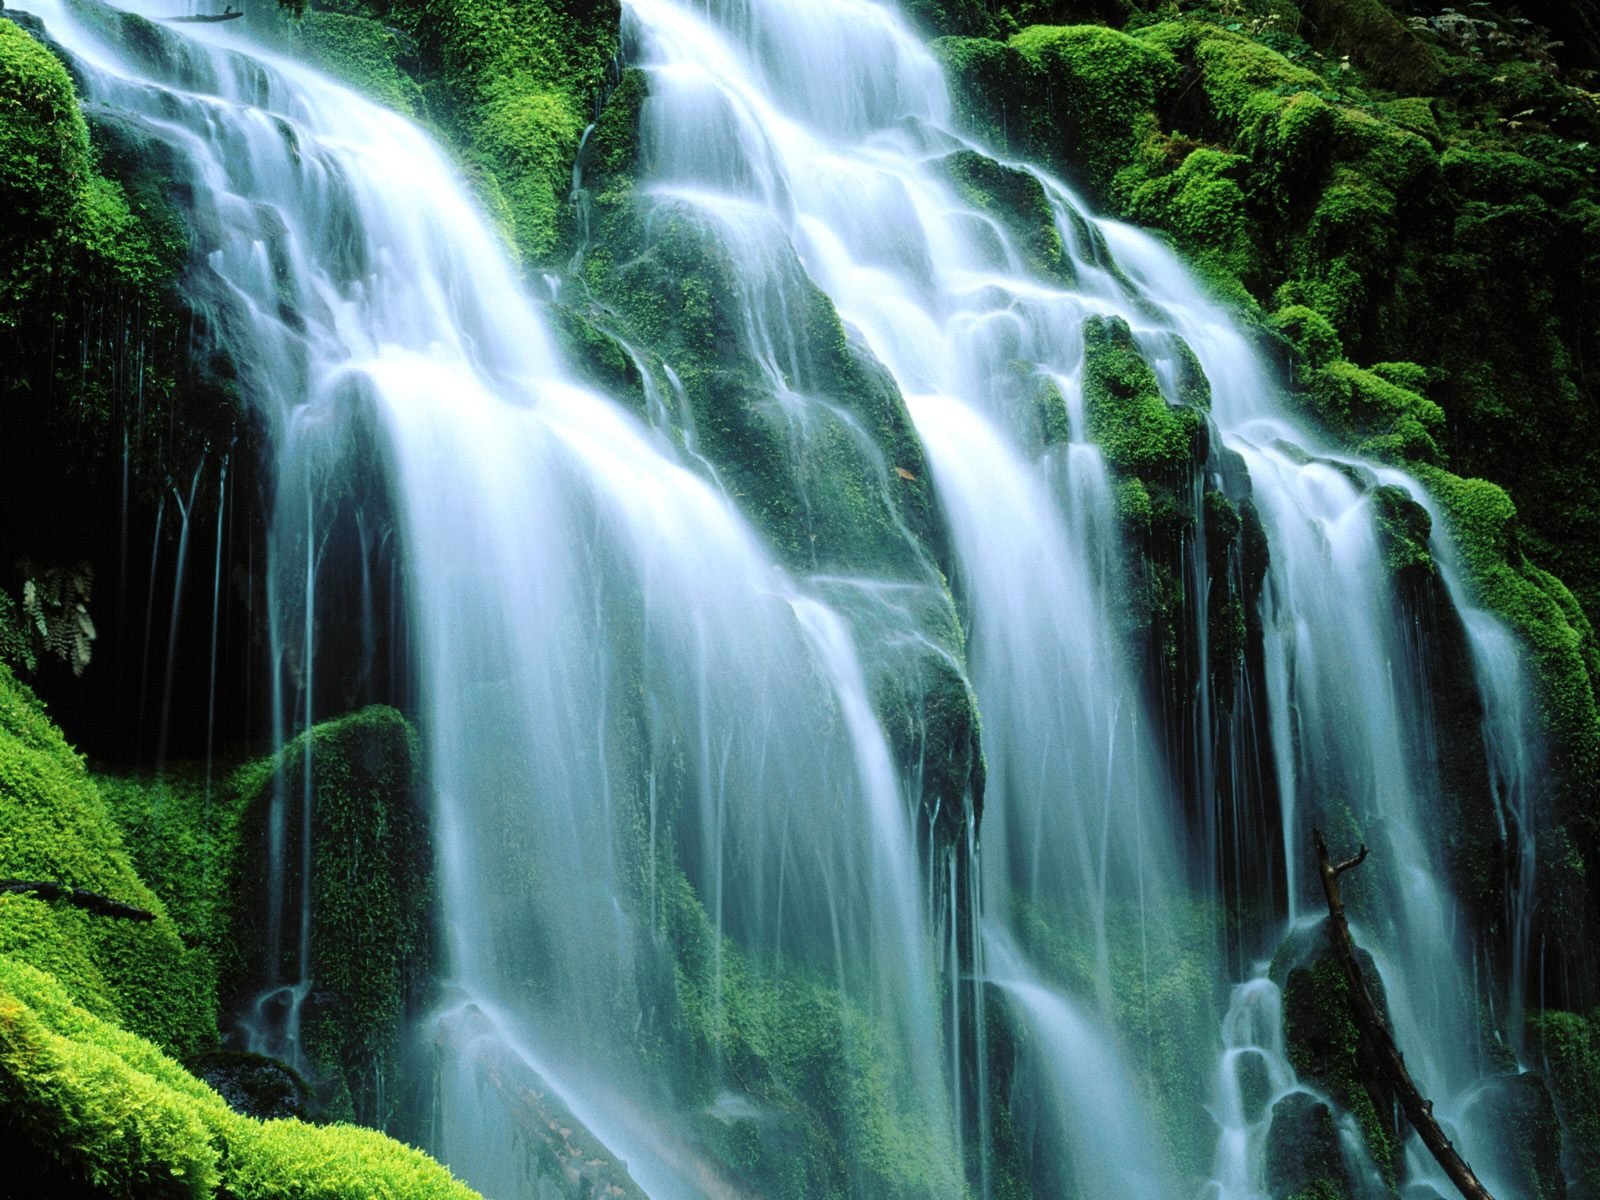  waterfall wallpapers category of hd wallpapers screensavers 1600x1200